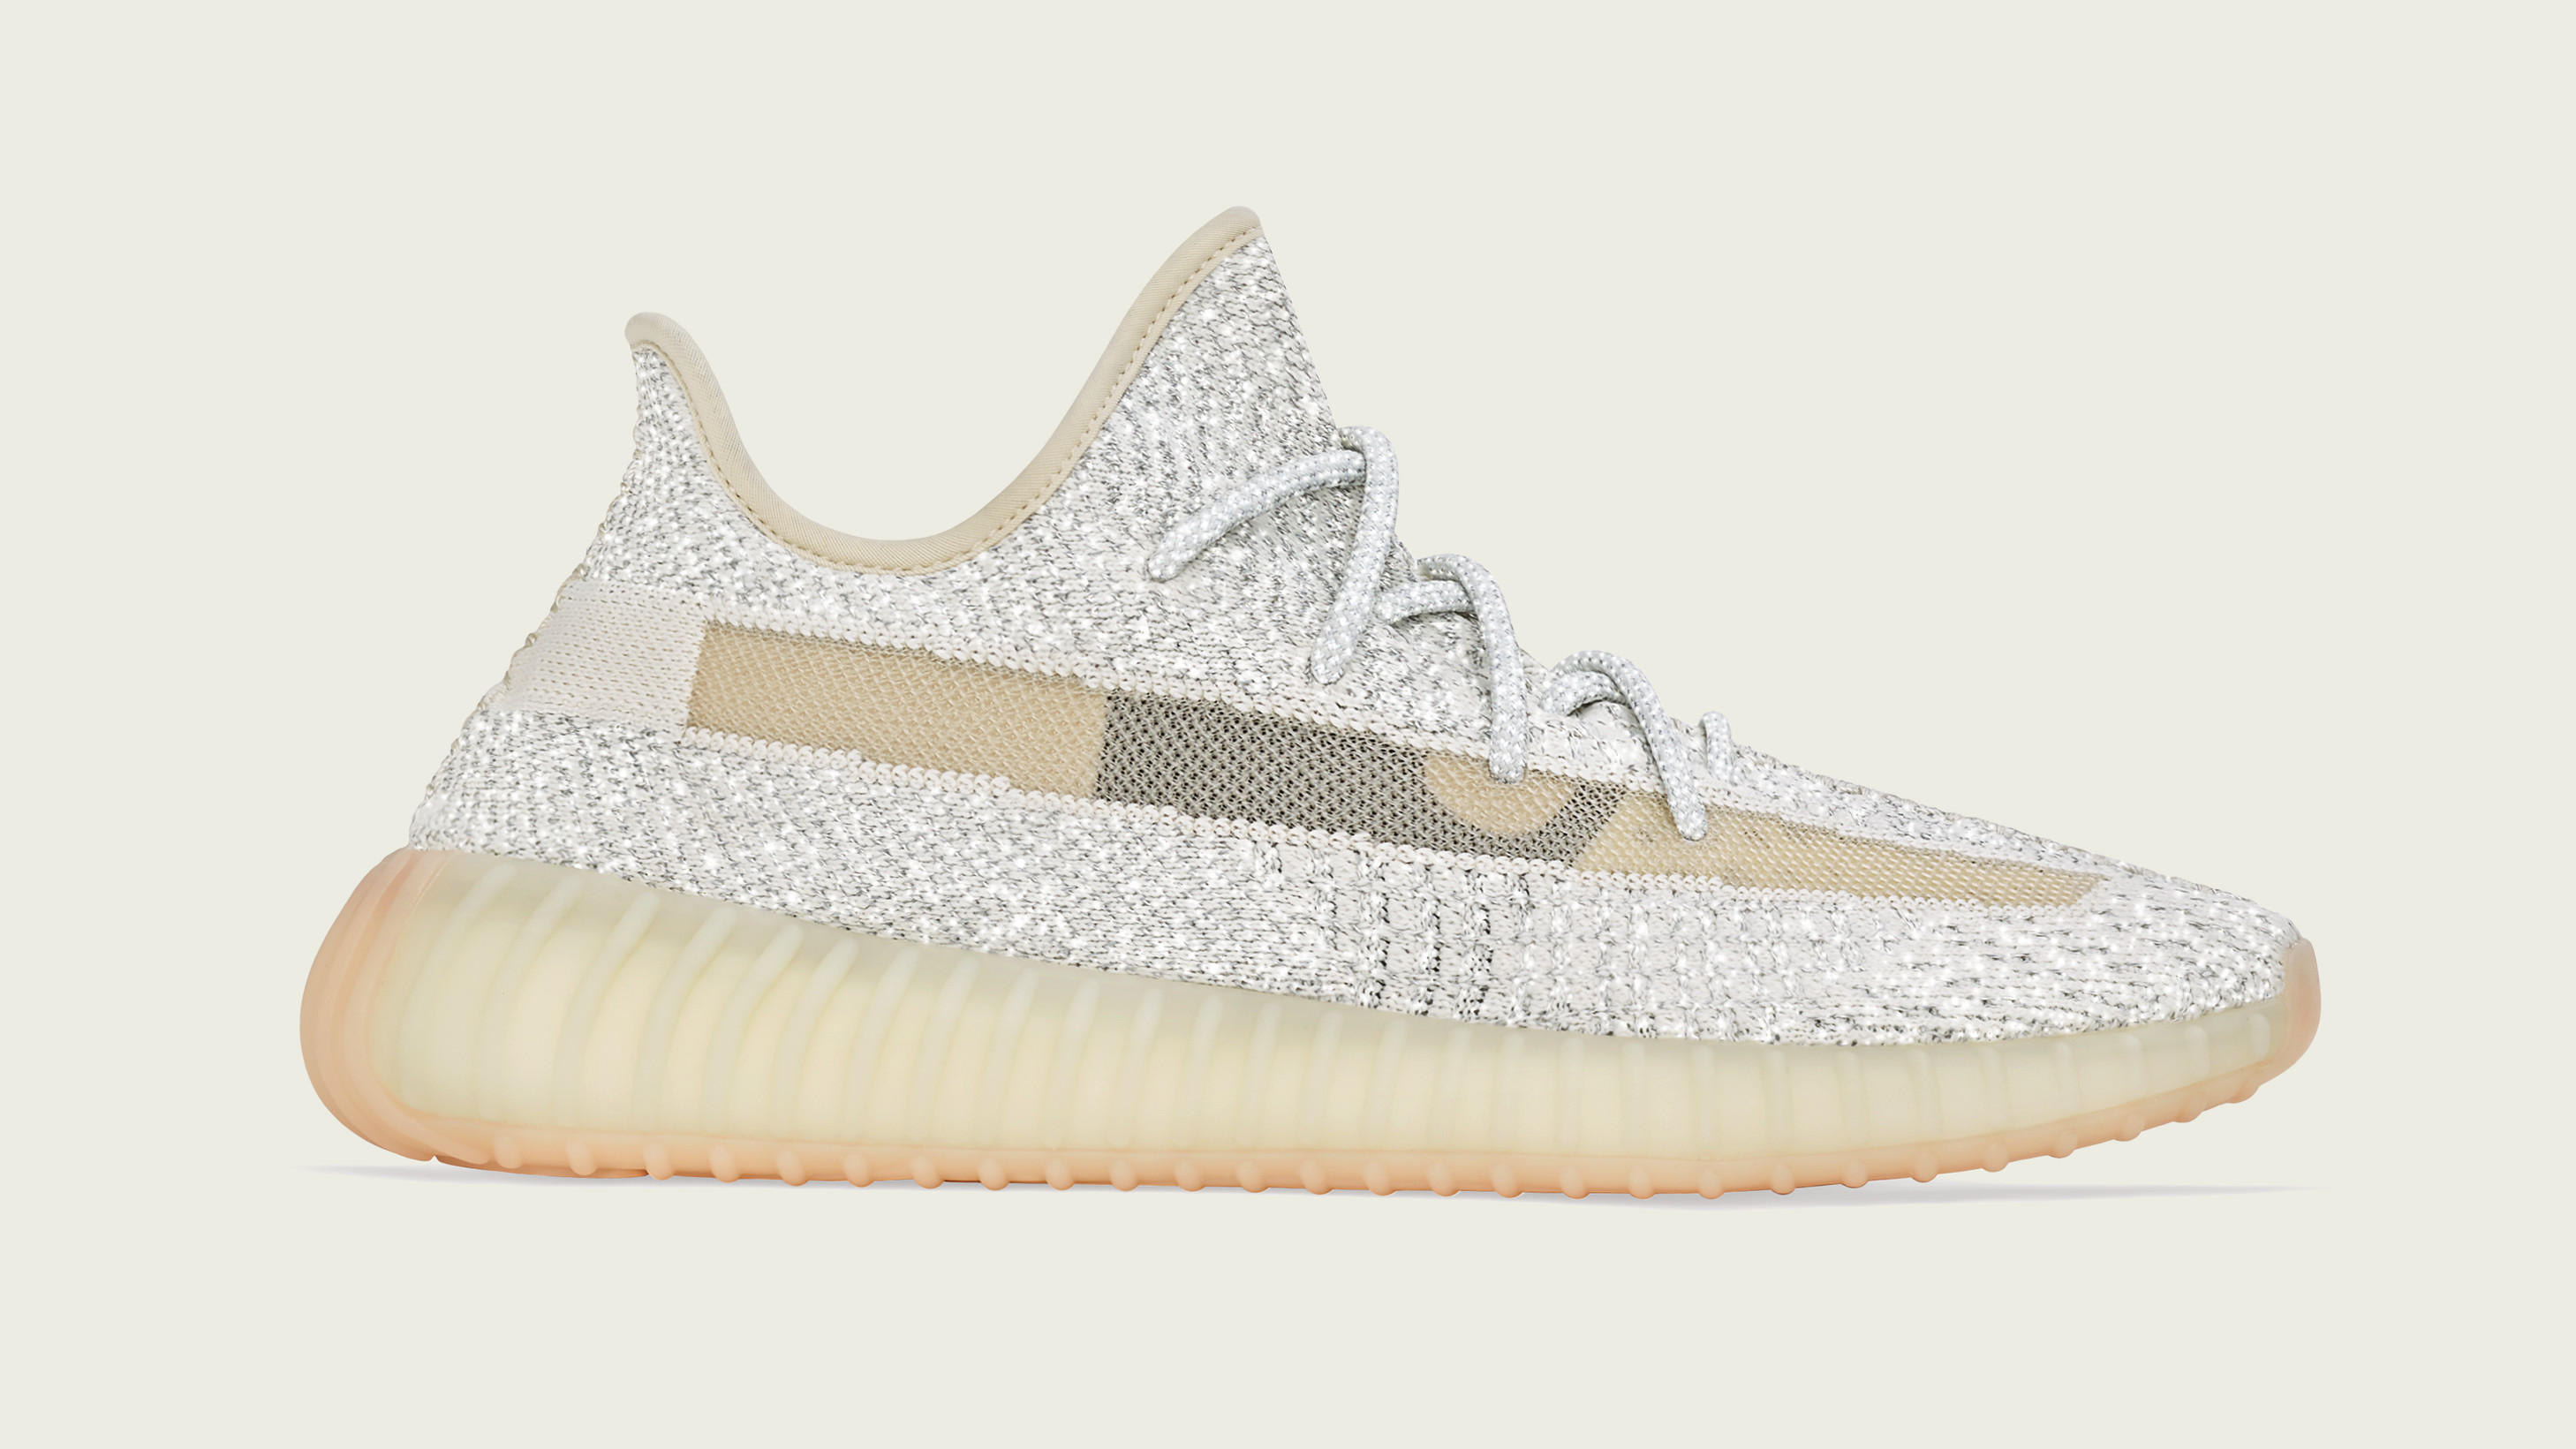 Adidas Yeezy Boost 350 V2 &#x27;Lundmark/Reflective&#x27; (Lateral)